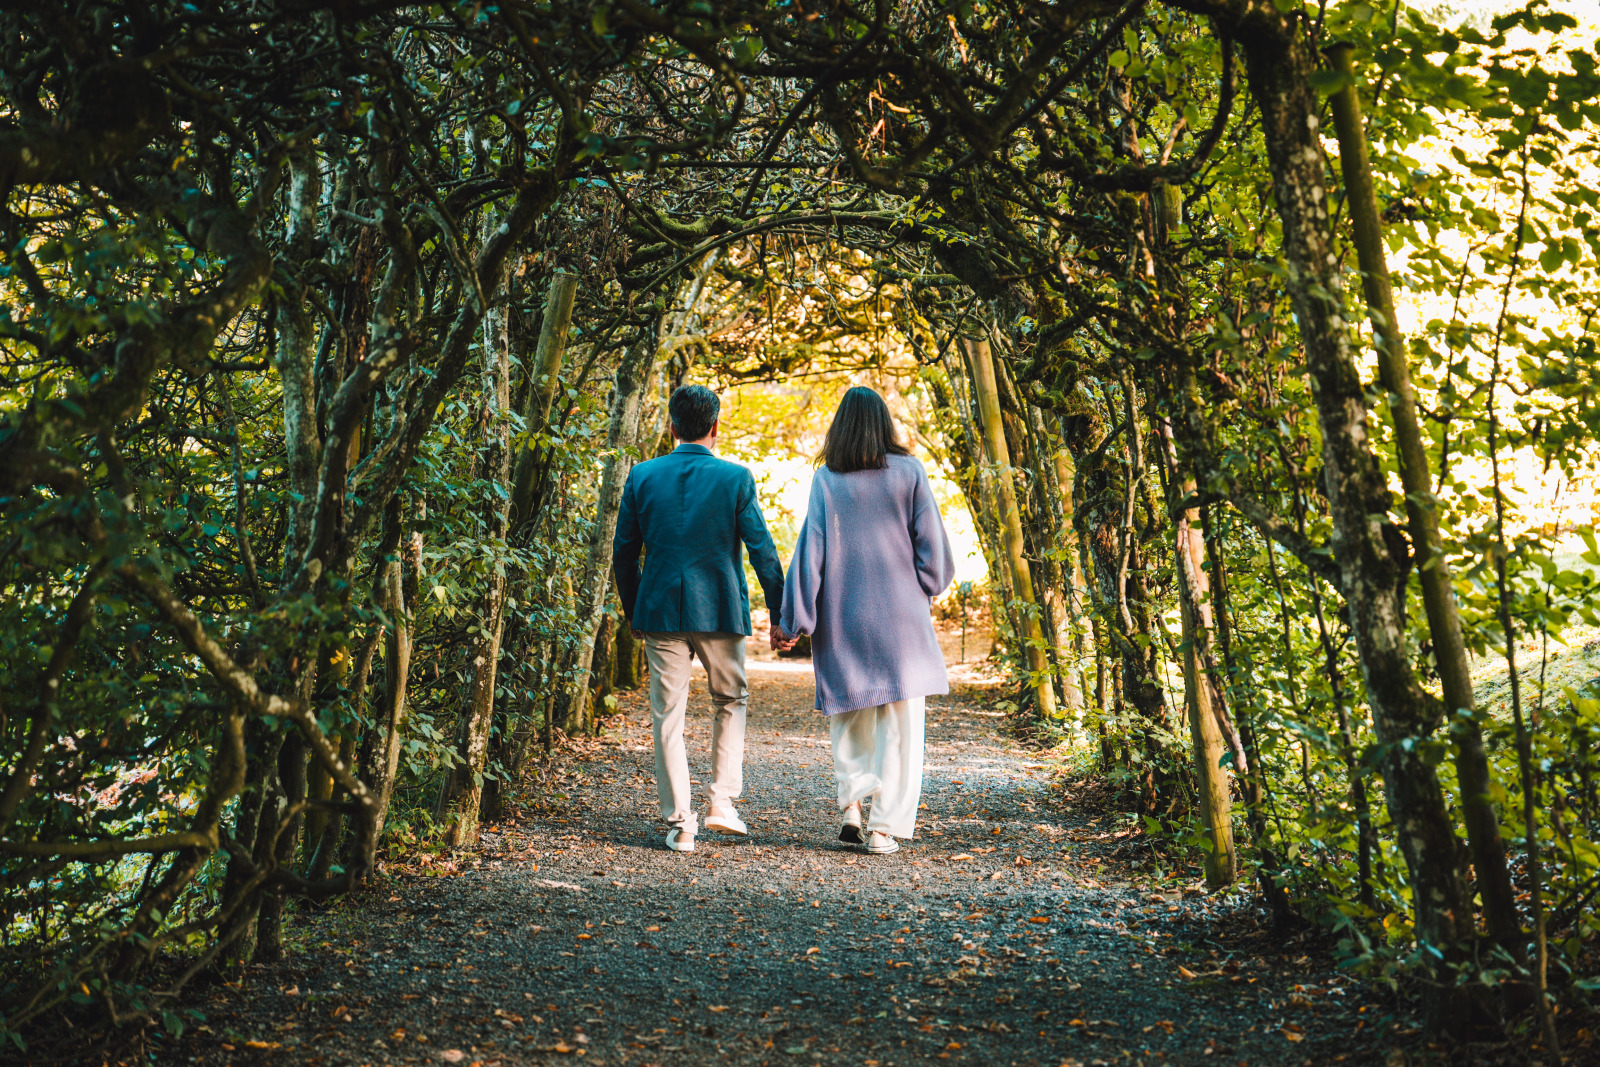 A couple walking in the Annevoie Gardens in Anhée